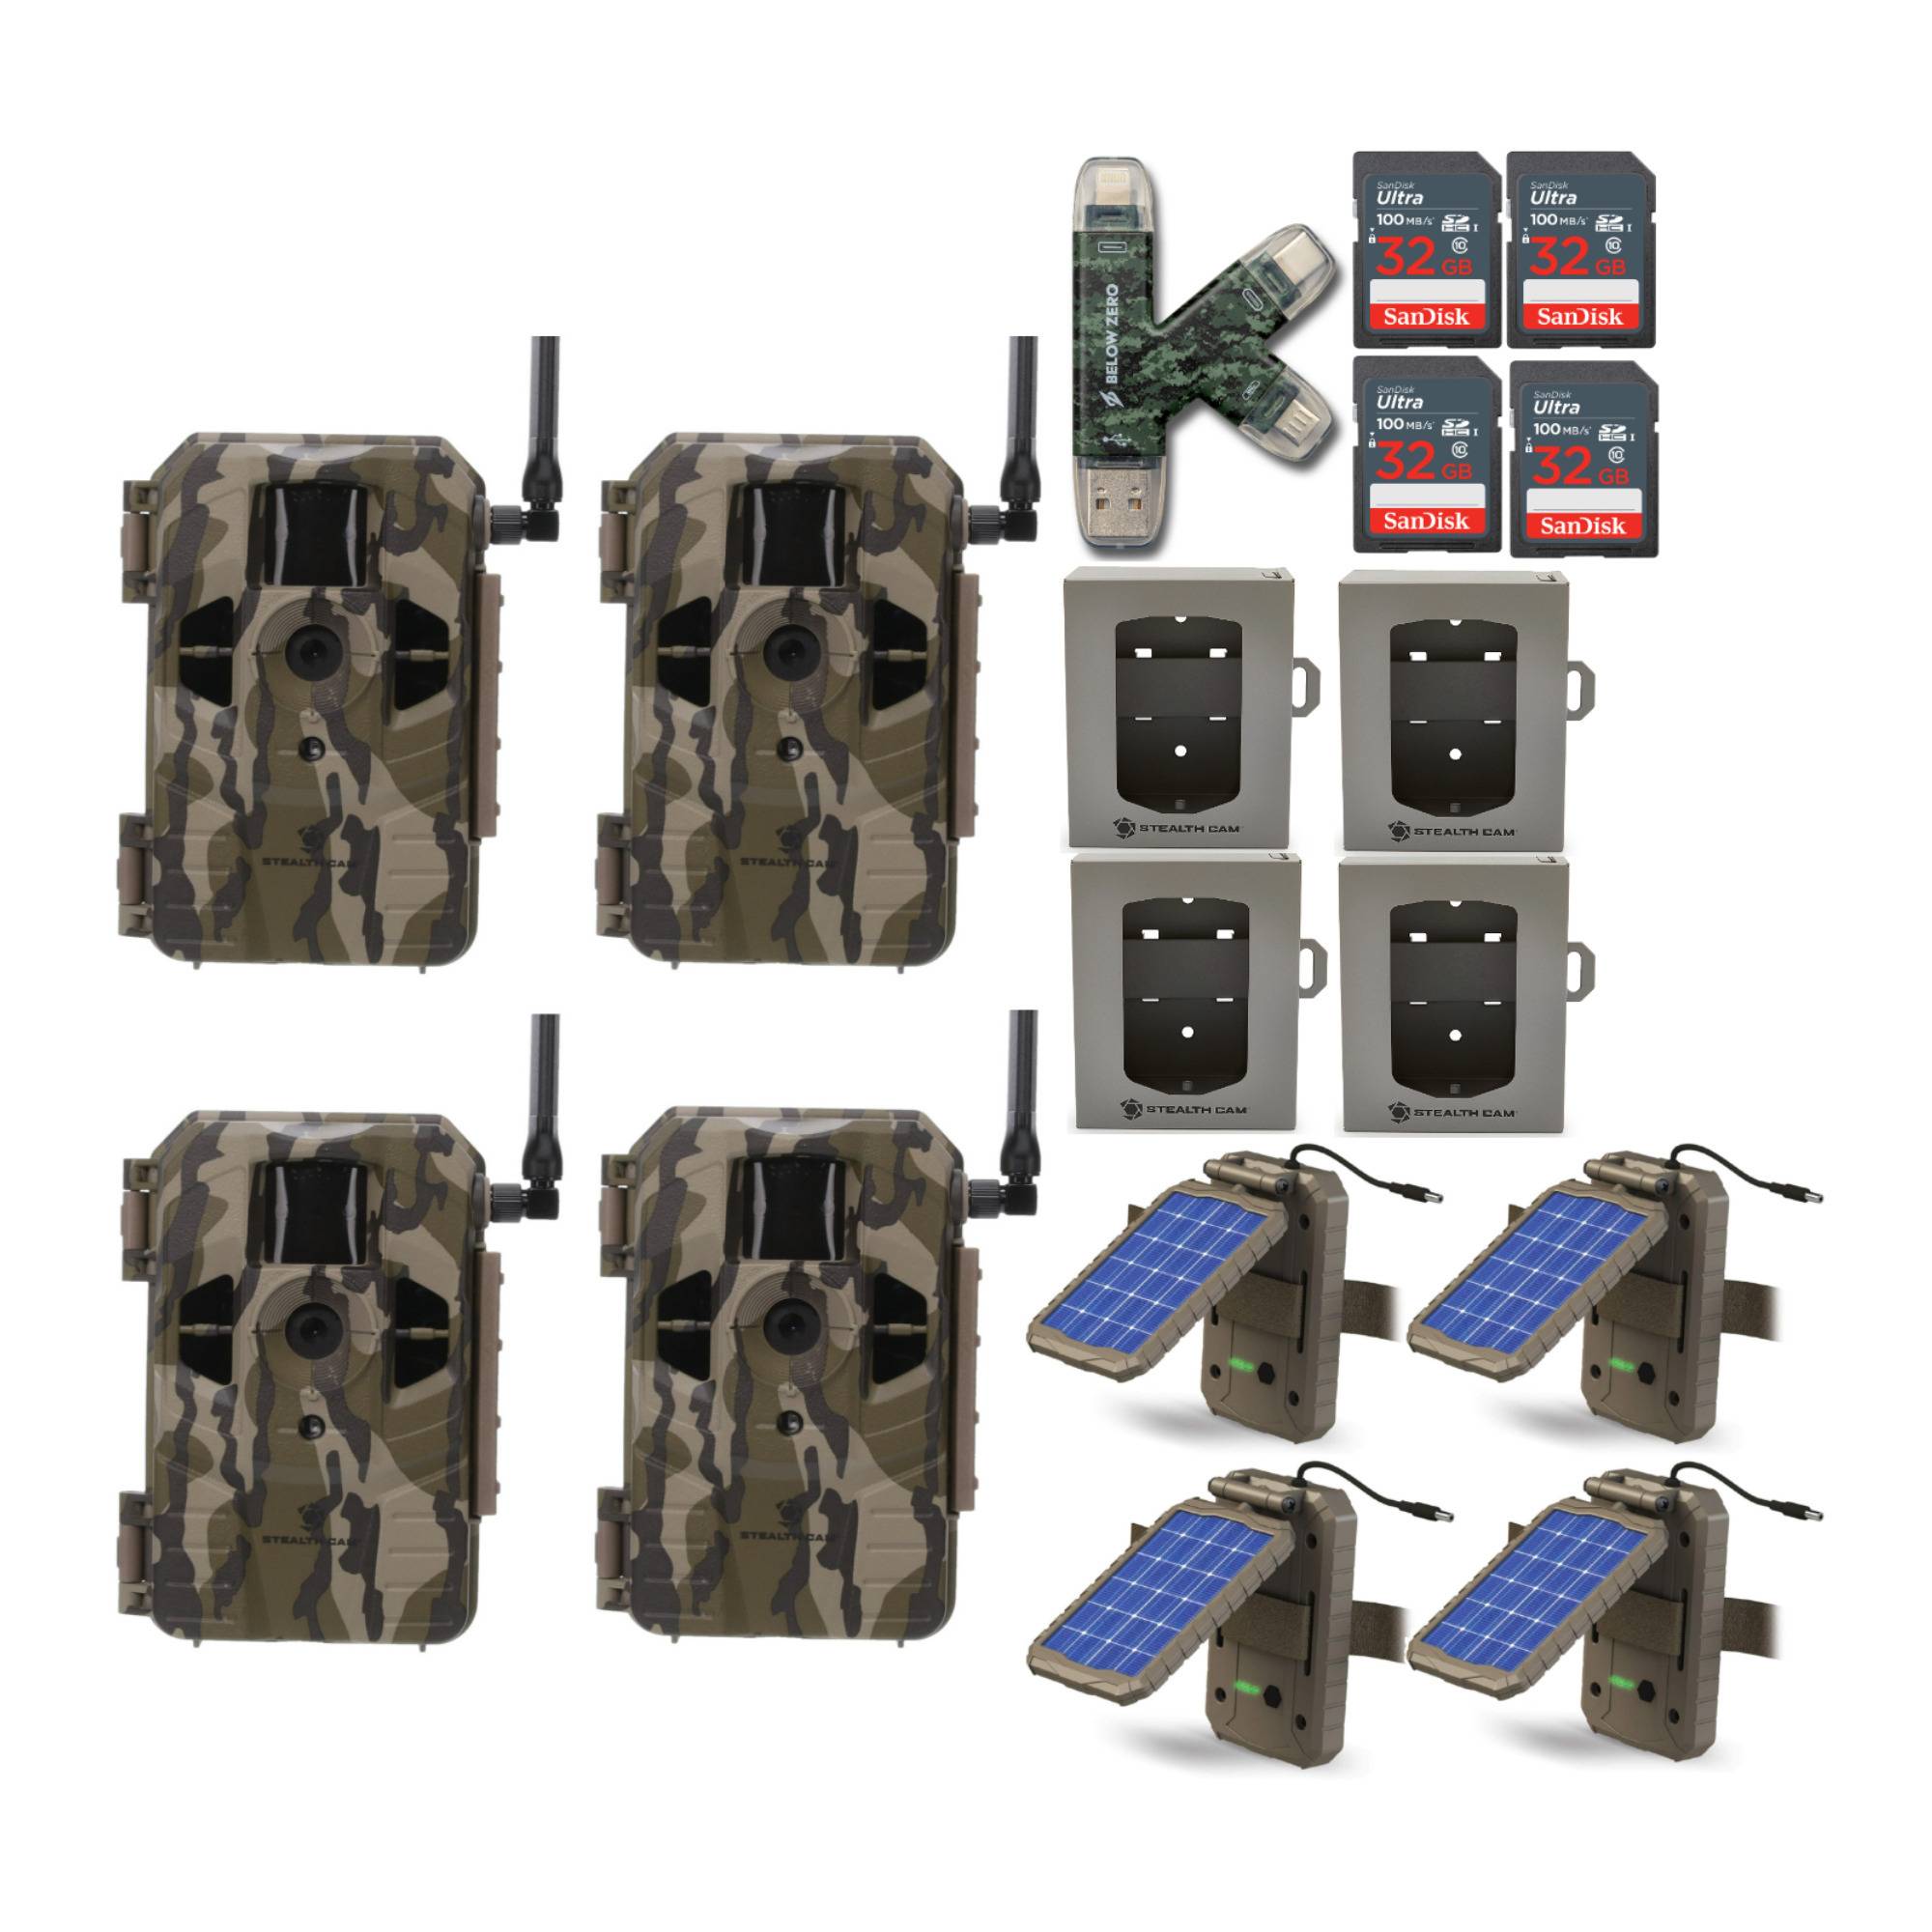 Stealth Cam Connect Cellular Trail Camera (AT&T) with Security Box and Solar Panel 4-Pack Bundle